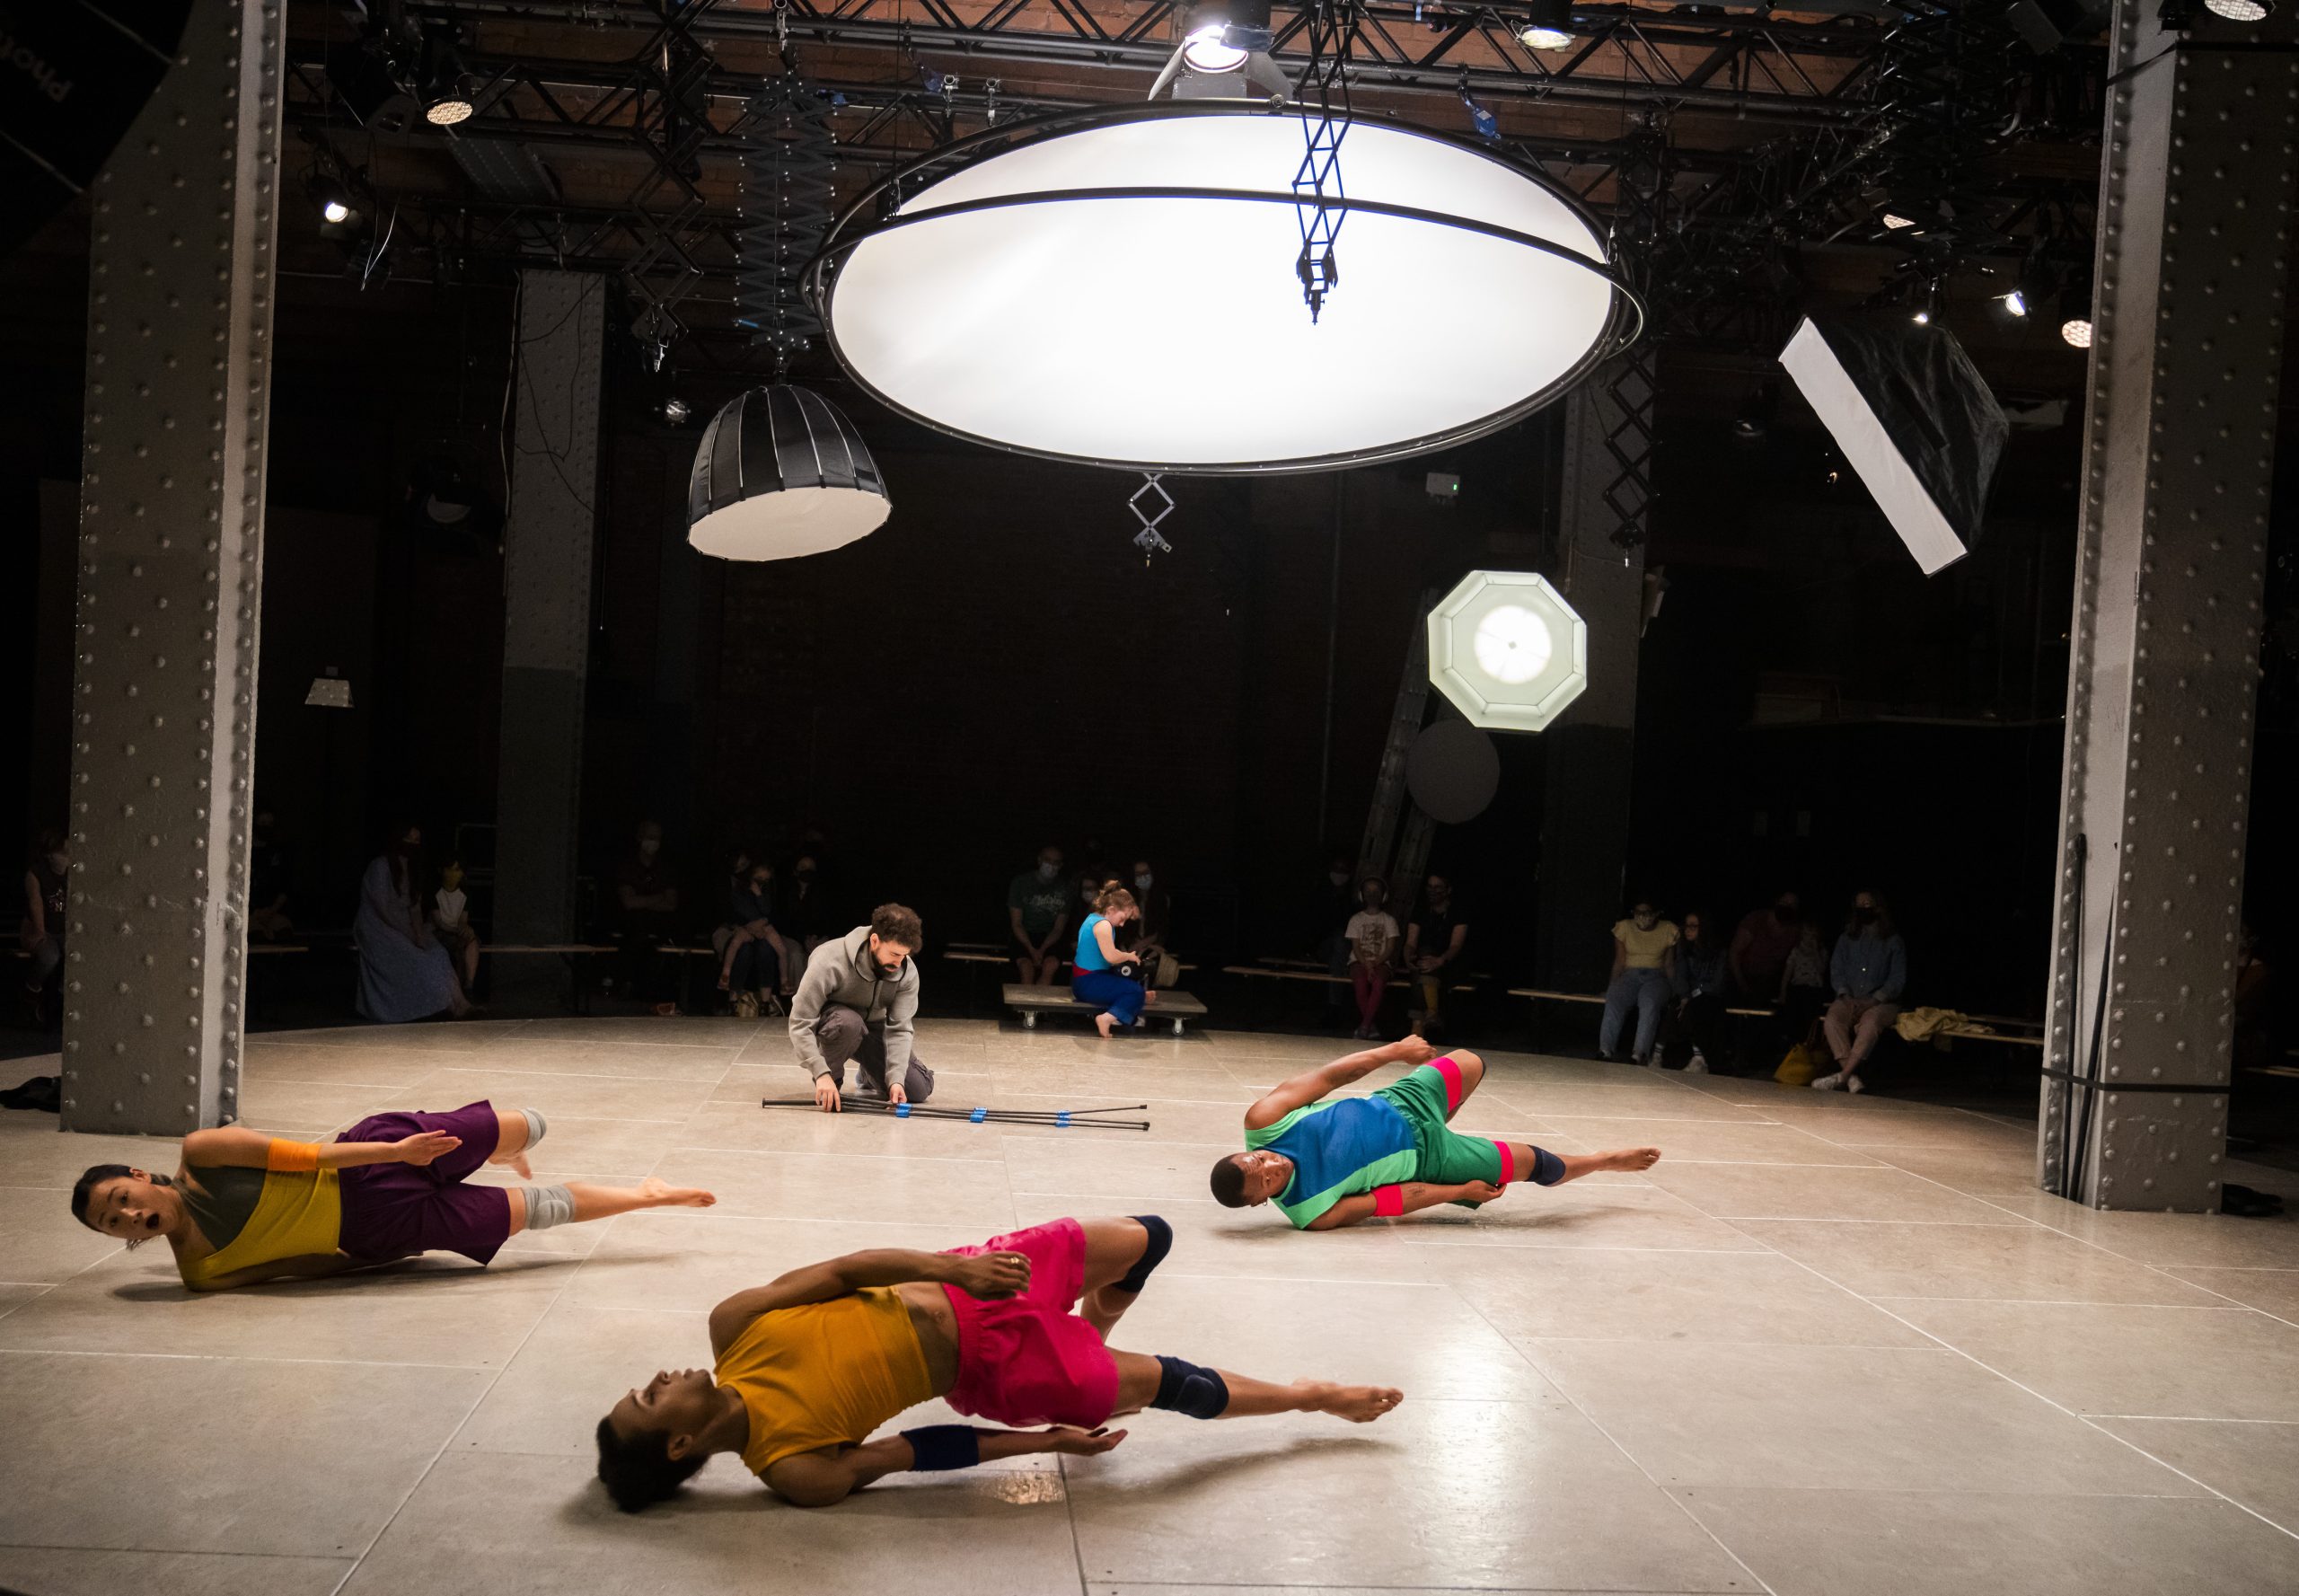 Three performers lie on stage. A fourth performer manipulates a camera tripod. The performers mimic the tripod's position with their bodies. Circle light reflectors are suspended above them.